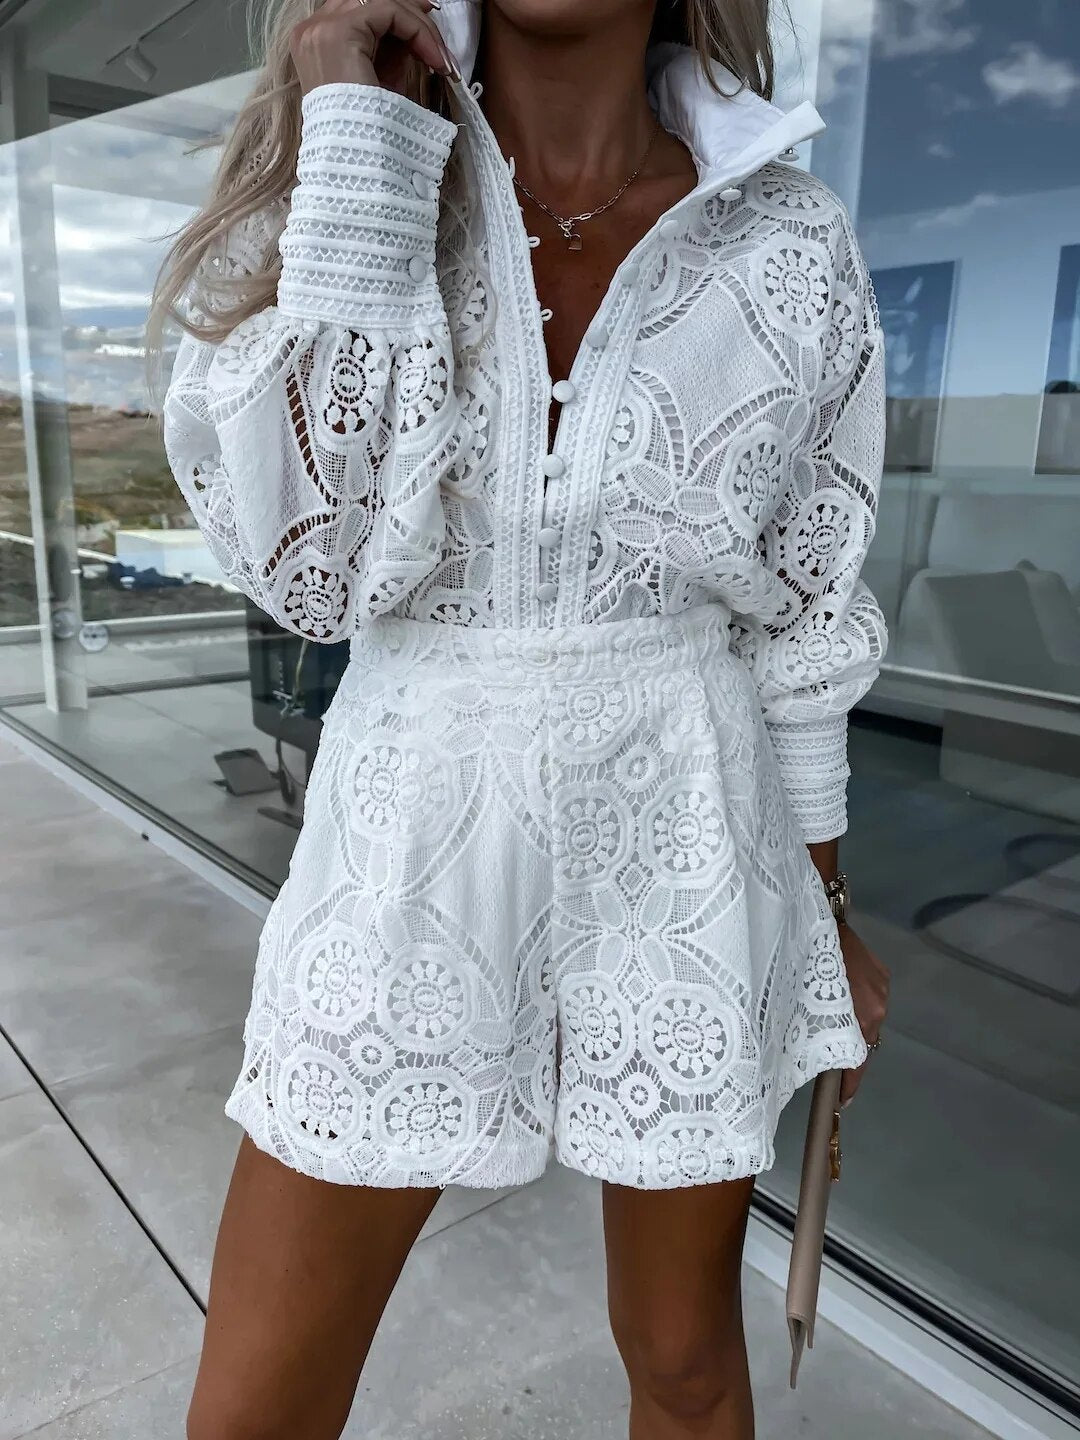 Hillary Hollow out Blouse and Shorts Set